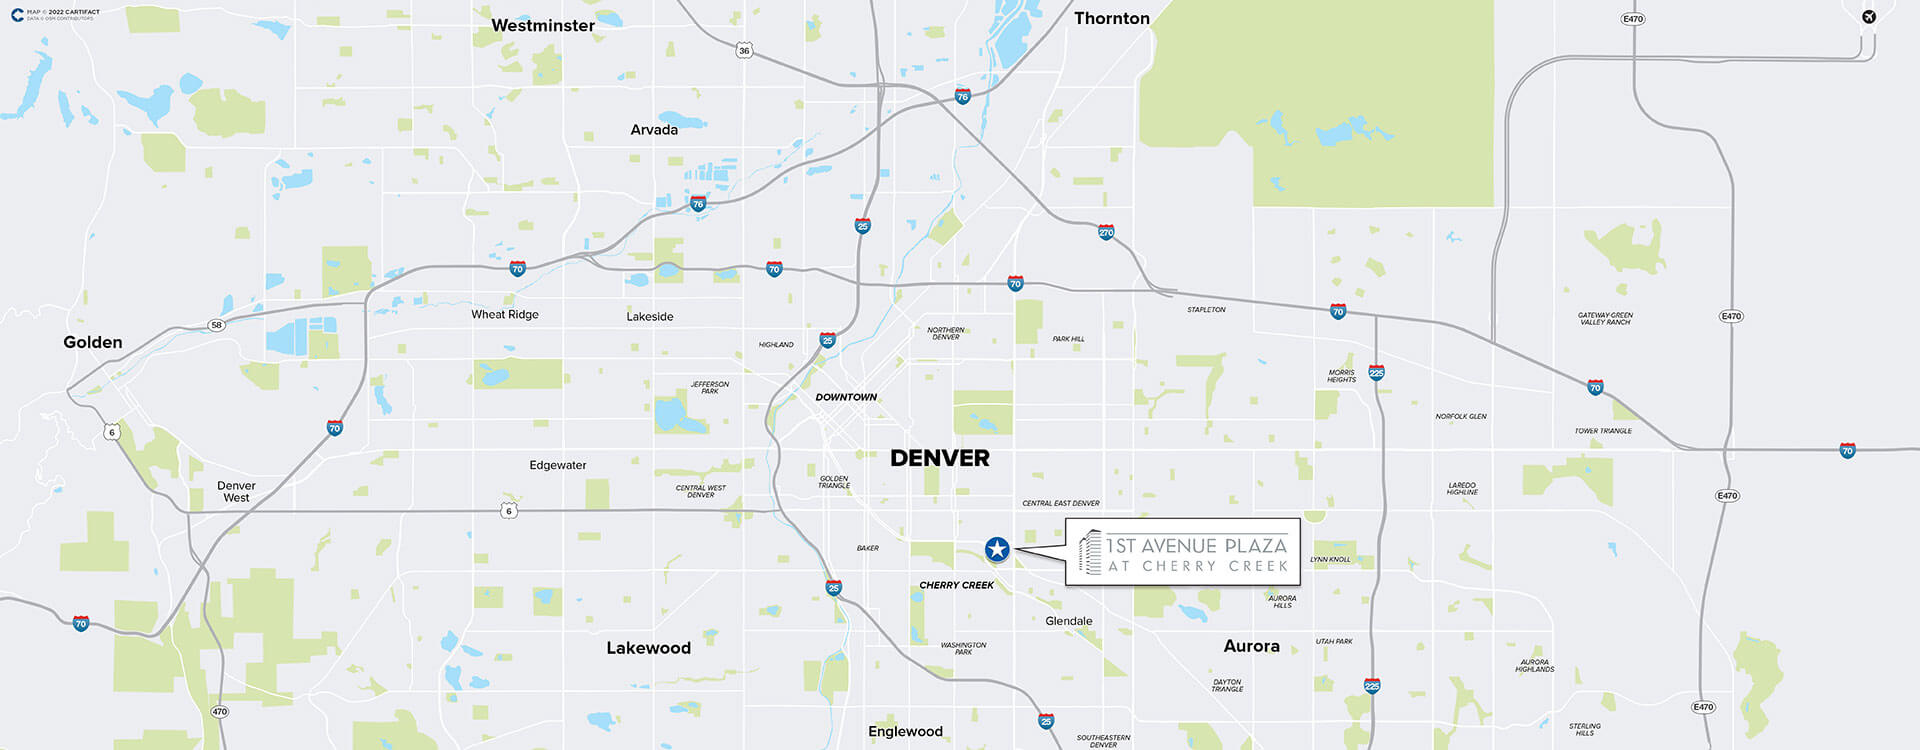 1st Avenue Plaza at Cherry Creek location map